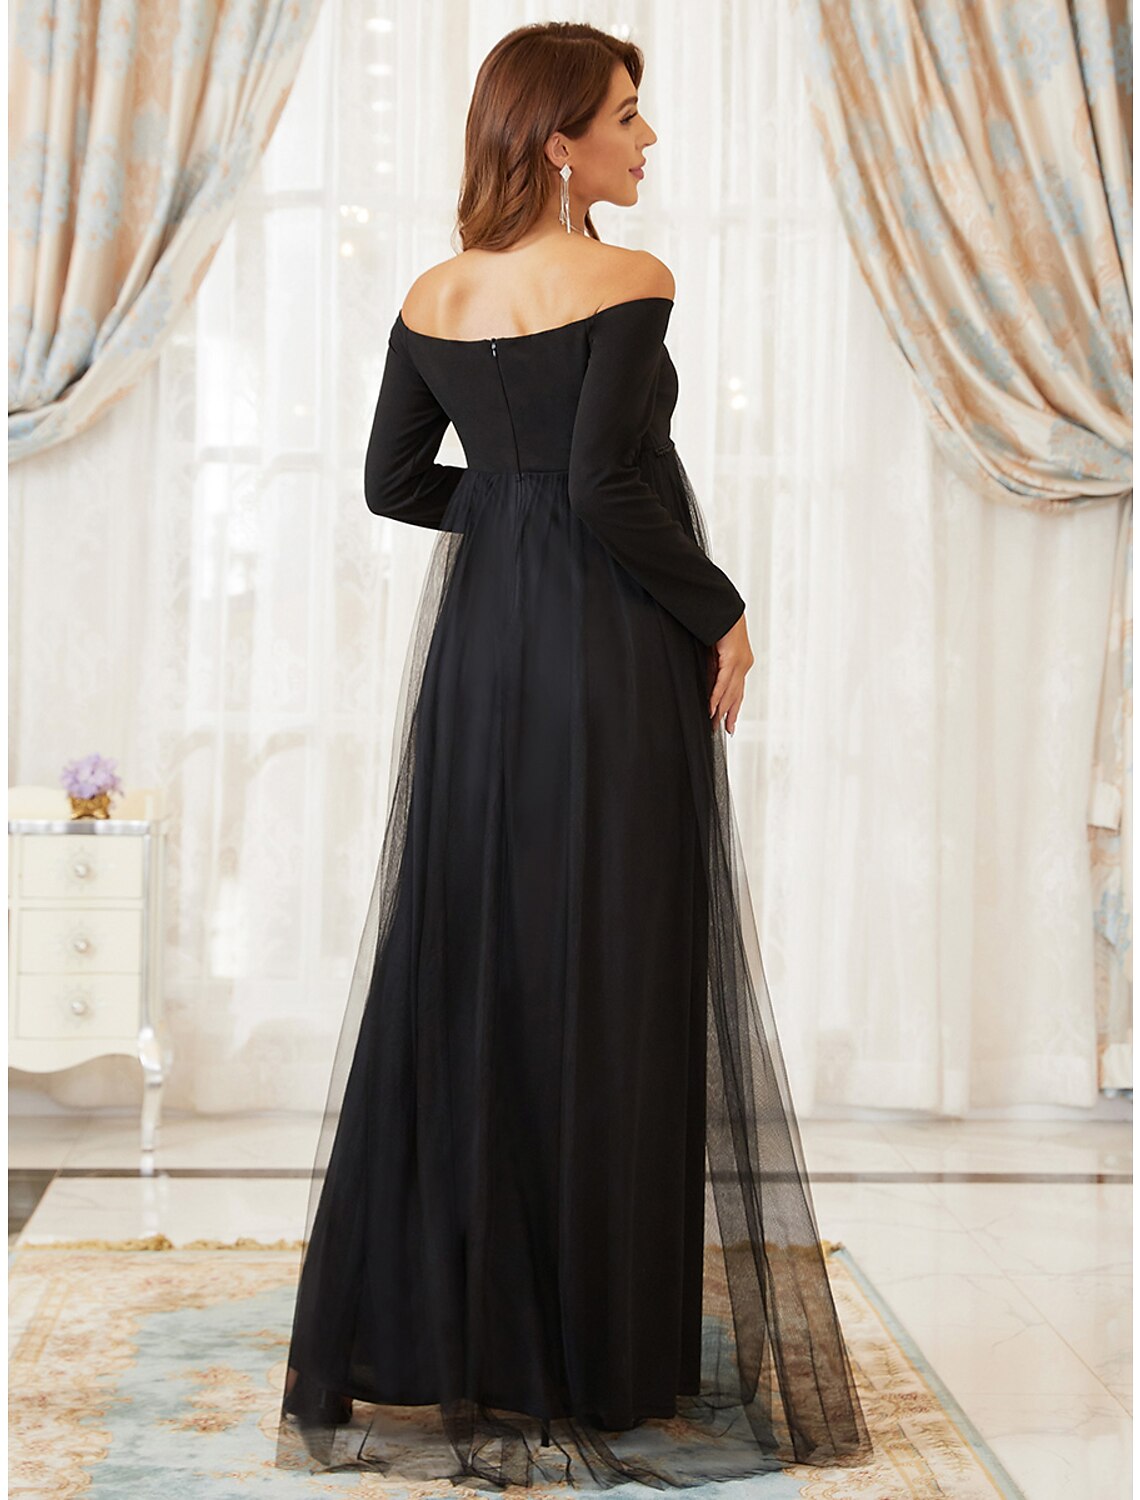 A-Line Mother of the Bride Dress Maternity Elegant Off Shoulder Floor Length Tulle Long Sleeve with Tier